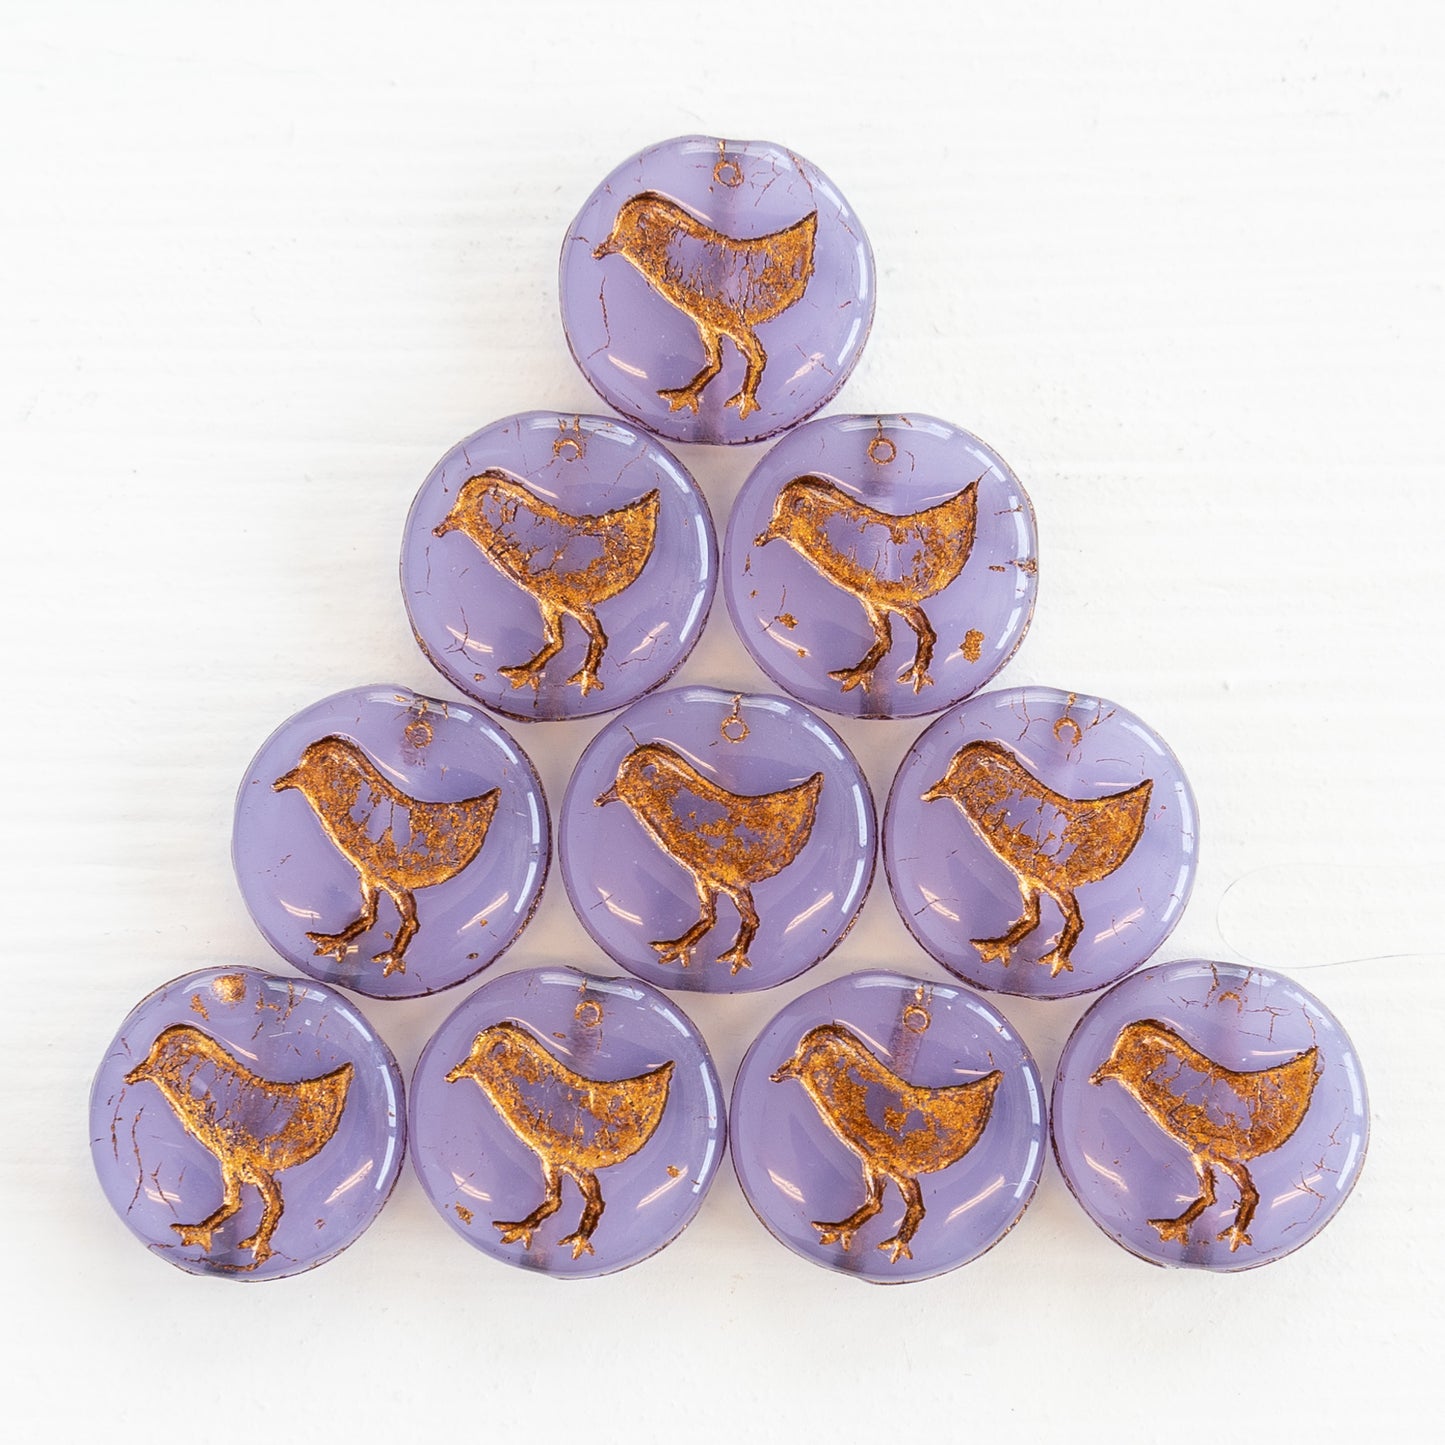 12mm Bird Coin Bead - Lavender with Copper Wash - Choose Amount